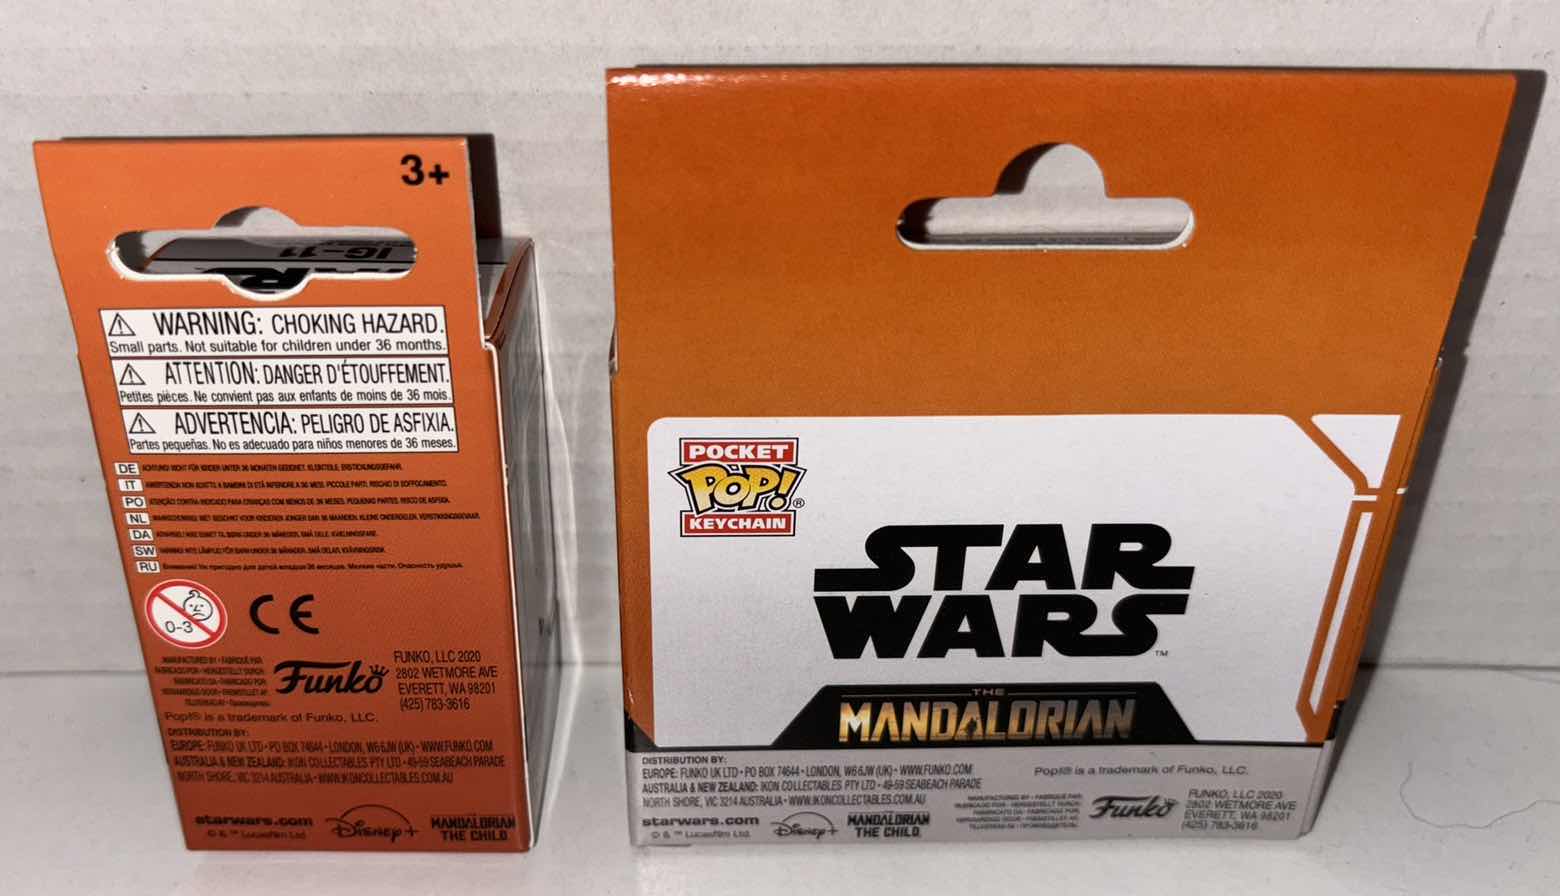 Photo 4 of NEW FUNKO POP! POCKET KEYCHAIN 2-PACK, STAR WARS “IG-11” & “THE CHILD WITH CUP” 